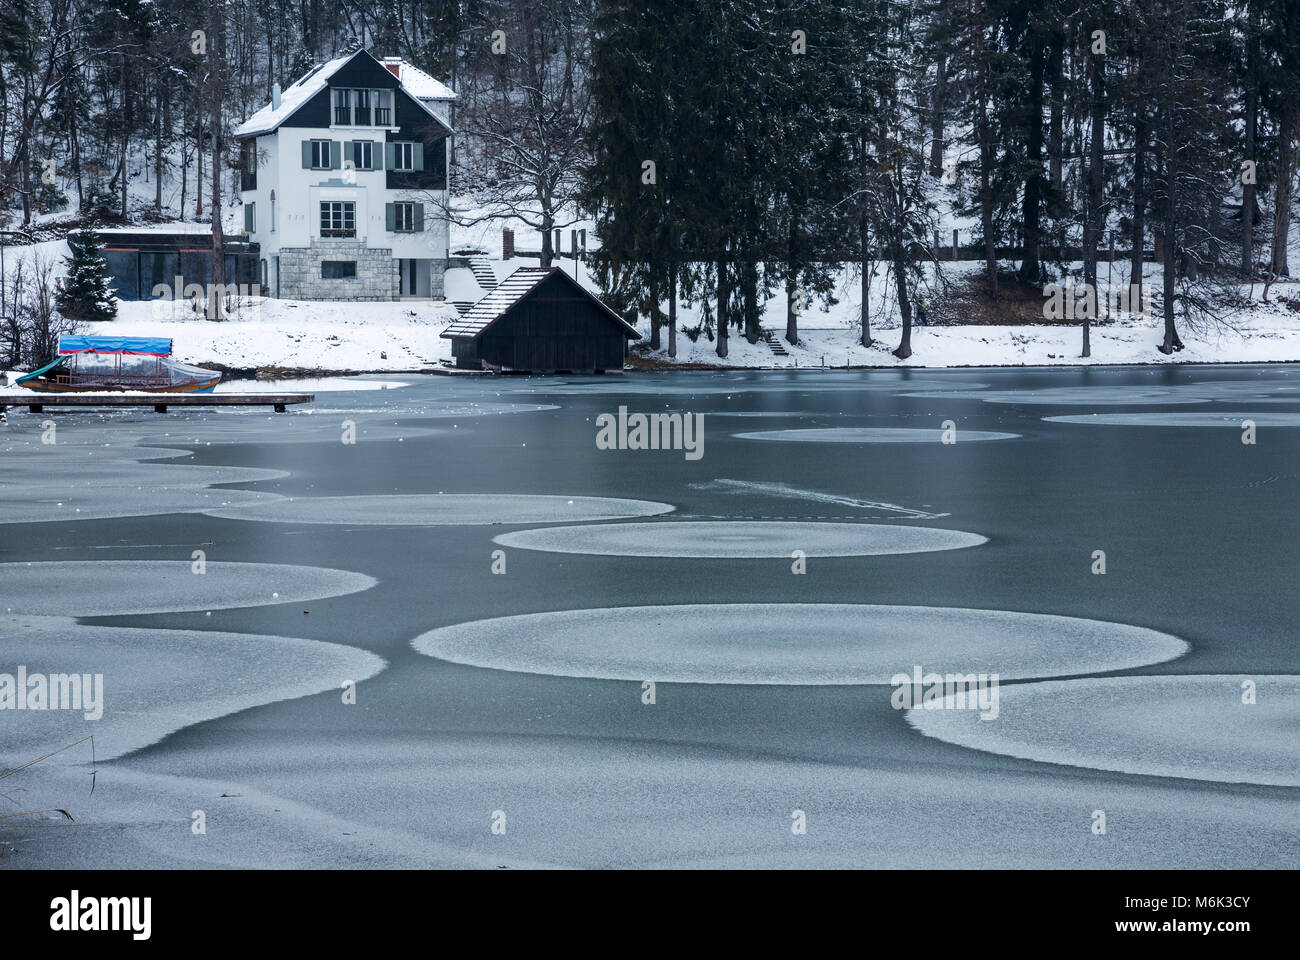 Lake Bled, Slovenia. 4th Mar, 2018. Ice circles on a frozen Lake Bled, Slovenia. The western side of the lake is slightly frozen after the Siberian storm brought freezing temperatures across Europe late February. Credit: Ian Middleton/Alamy Live News Stock Photo